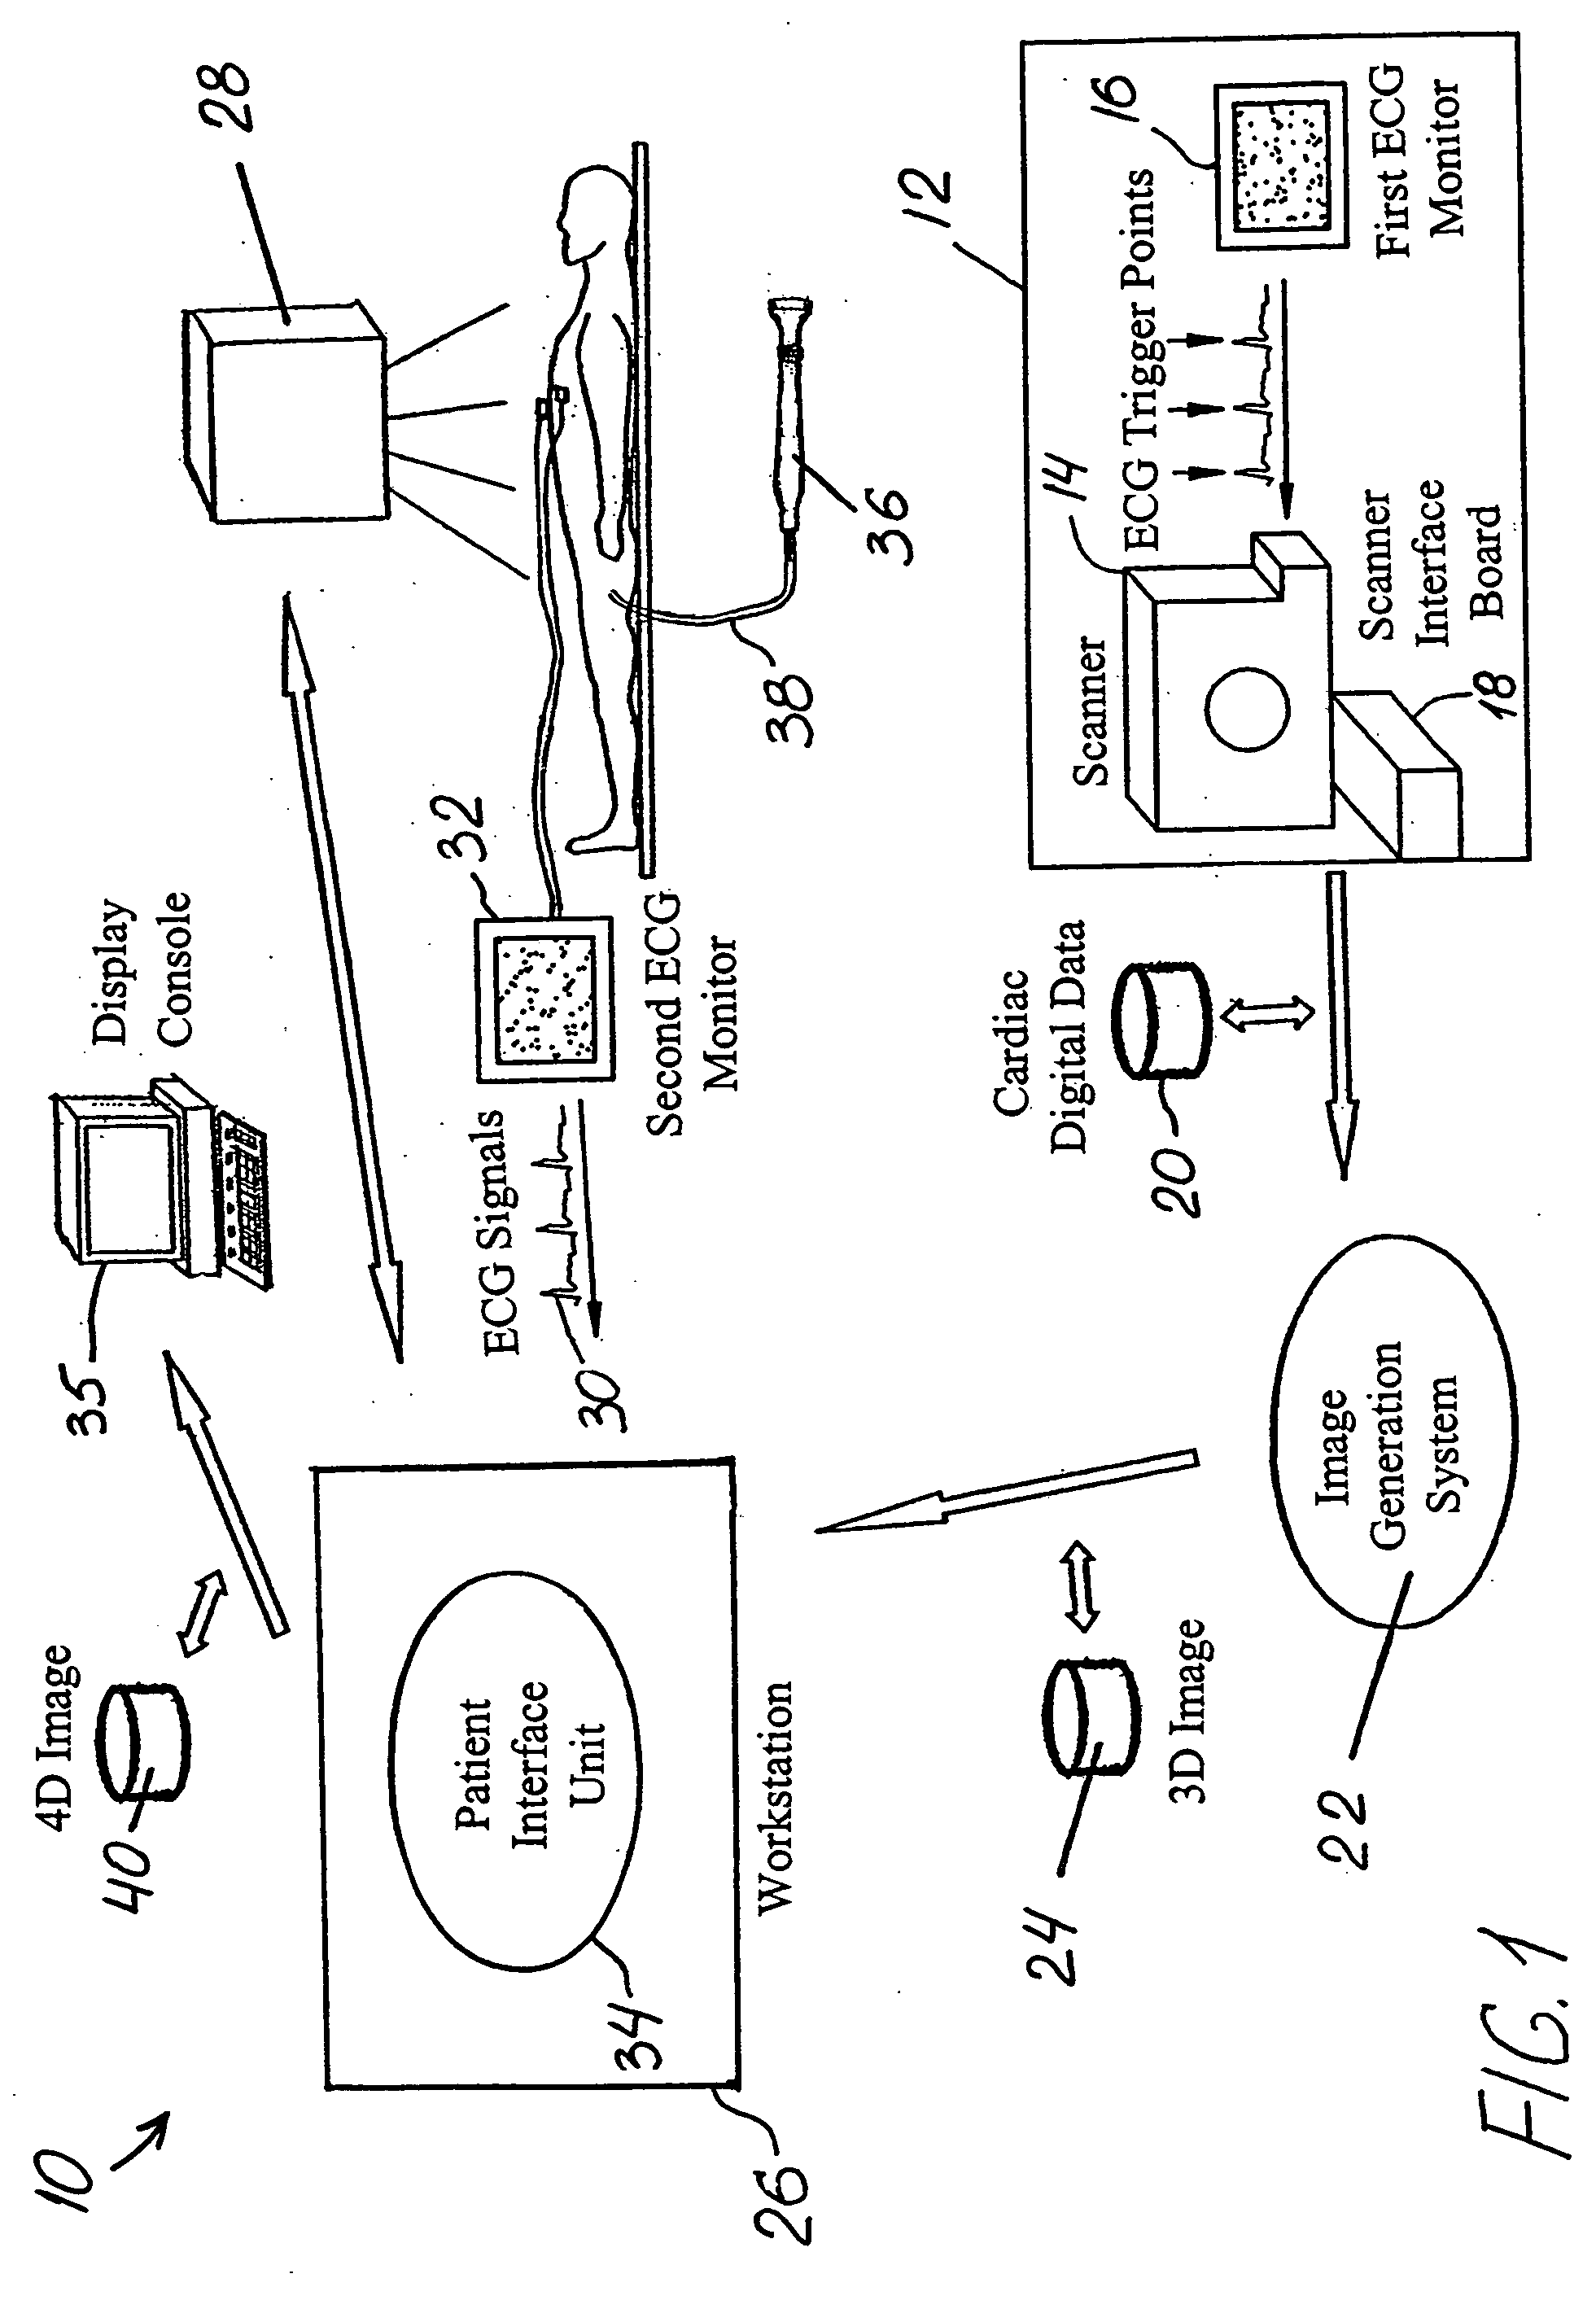 Method and system of treatment of cardiac arrhythmias using 4D imaging